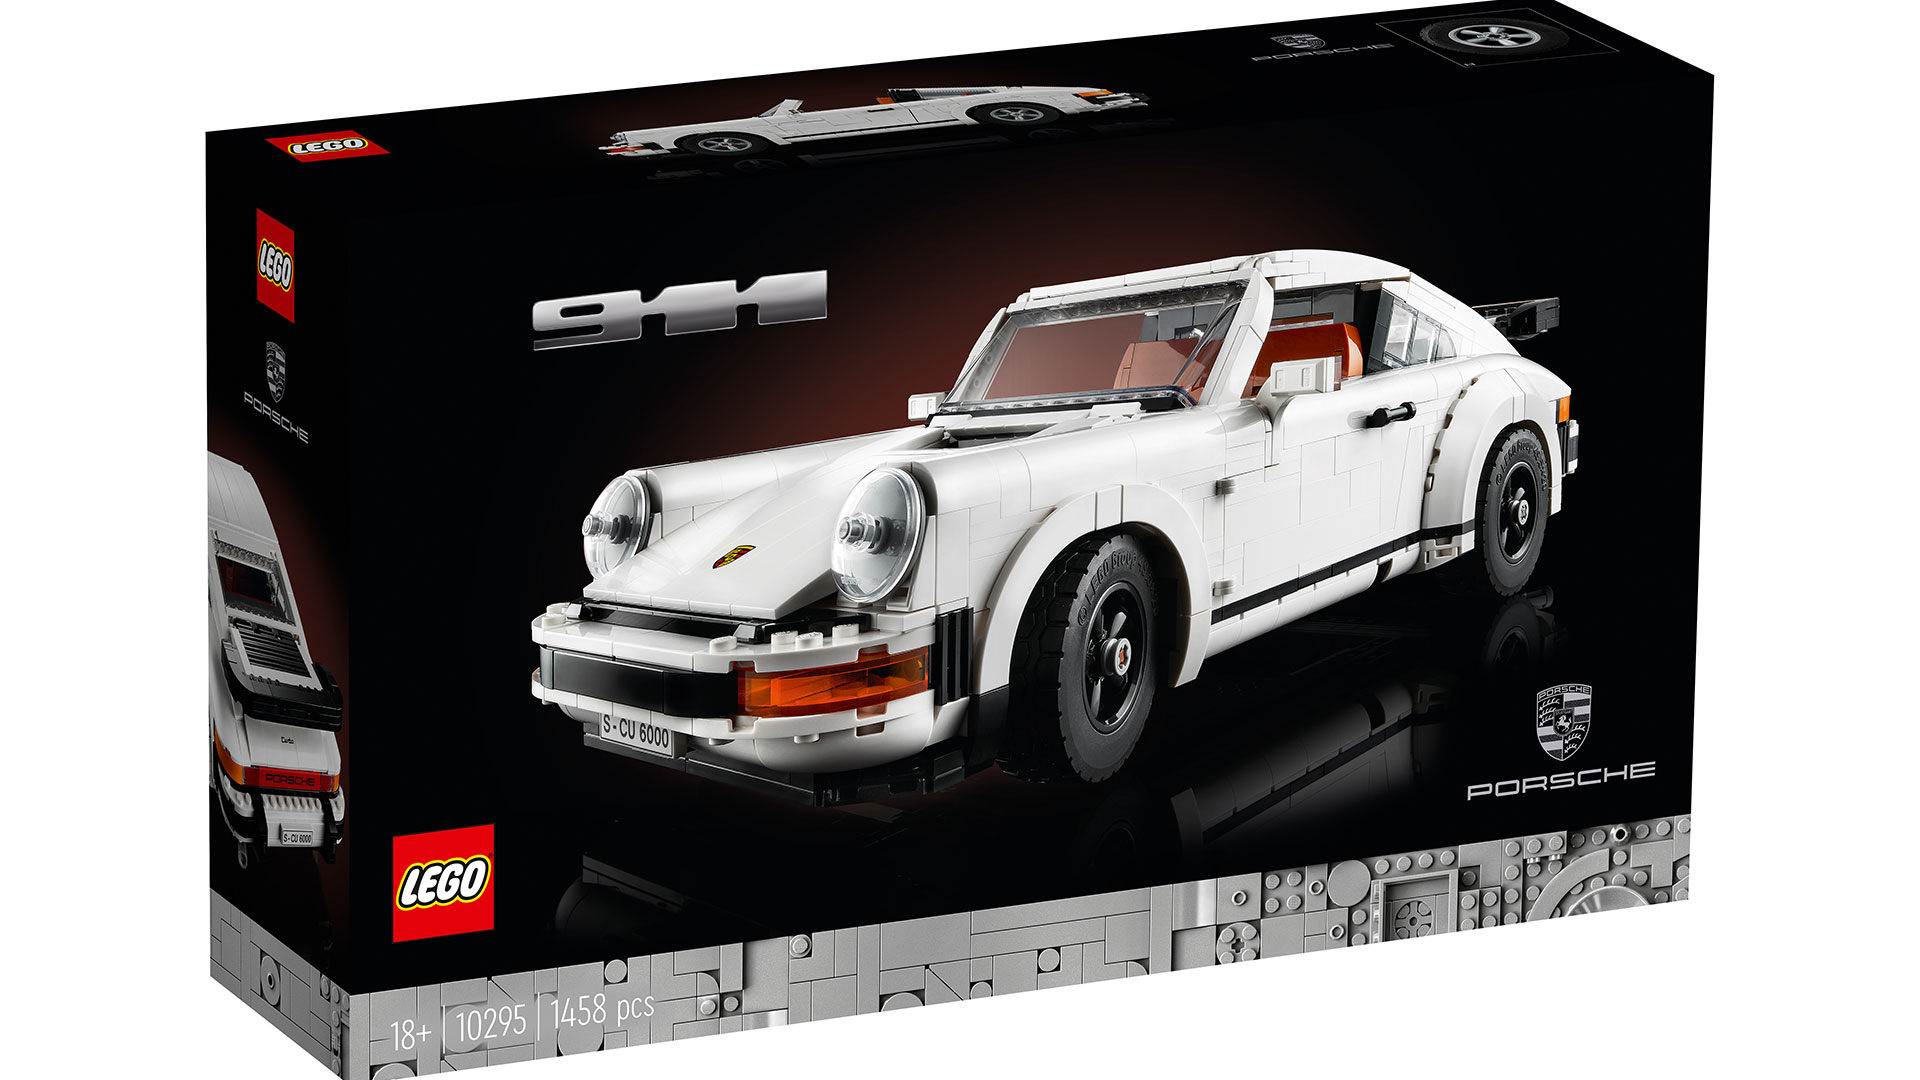 The LEGO® Group has wound the clock back to the era of big hair, new wave and punk rock for the launch of the latest LEGO car set, the two-in-one LEGO Porsche 911 Turbo and 911 Targa bridges the gap across two decades to unite this pair of iconic sports cars.  To celebrate the latest LEGO version of the ubiquitous rear-engined German sports car, LEGO has collaborated with Porsche to recreate a selection of the most vivid adverts from the model’s history, this time starring the smaller but equally desirable LEGO namesake. 